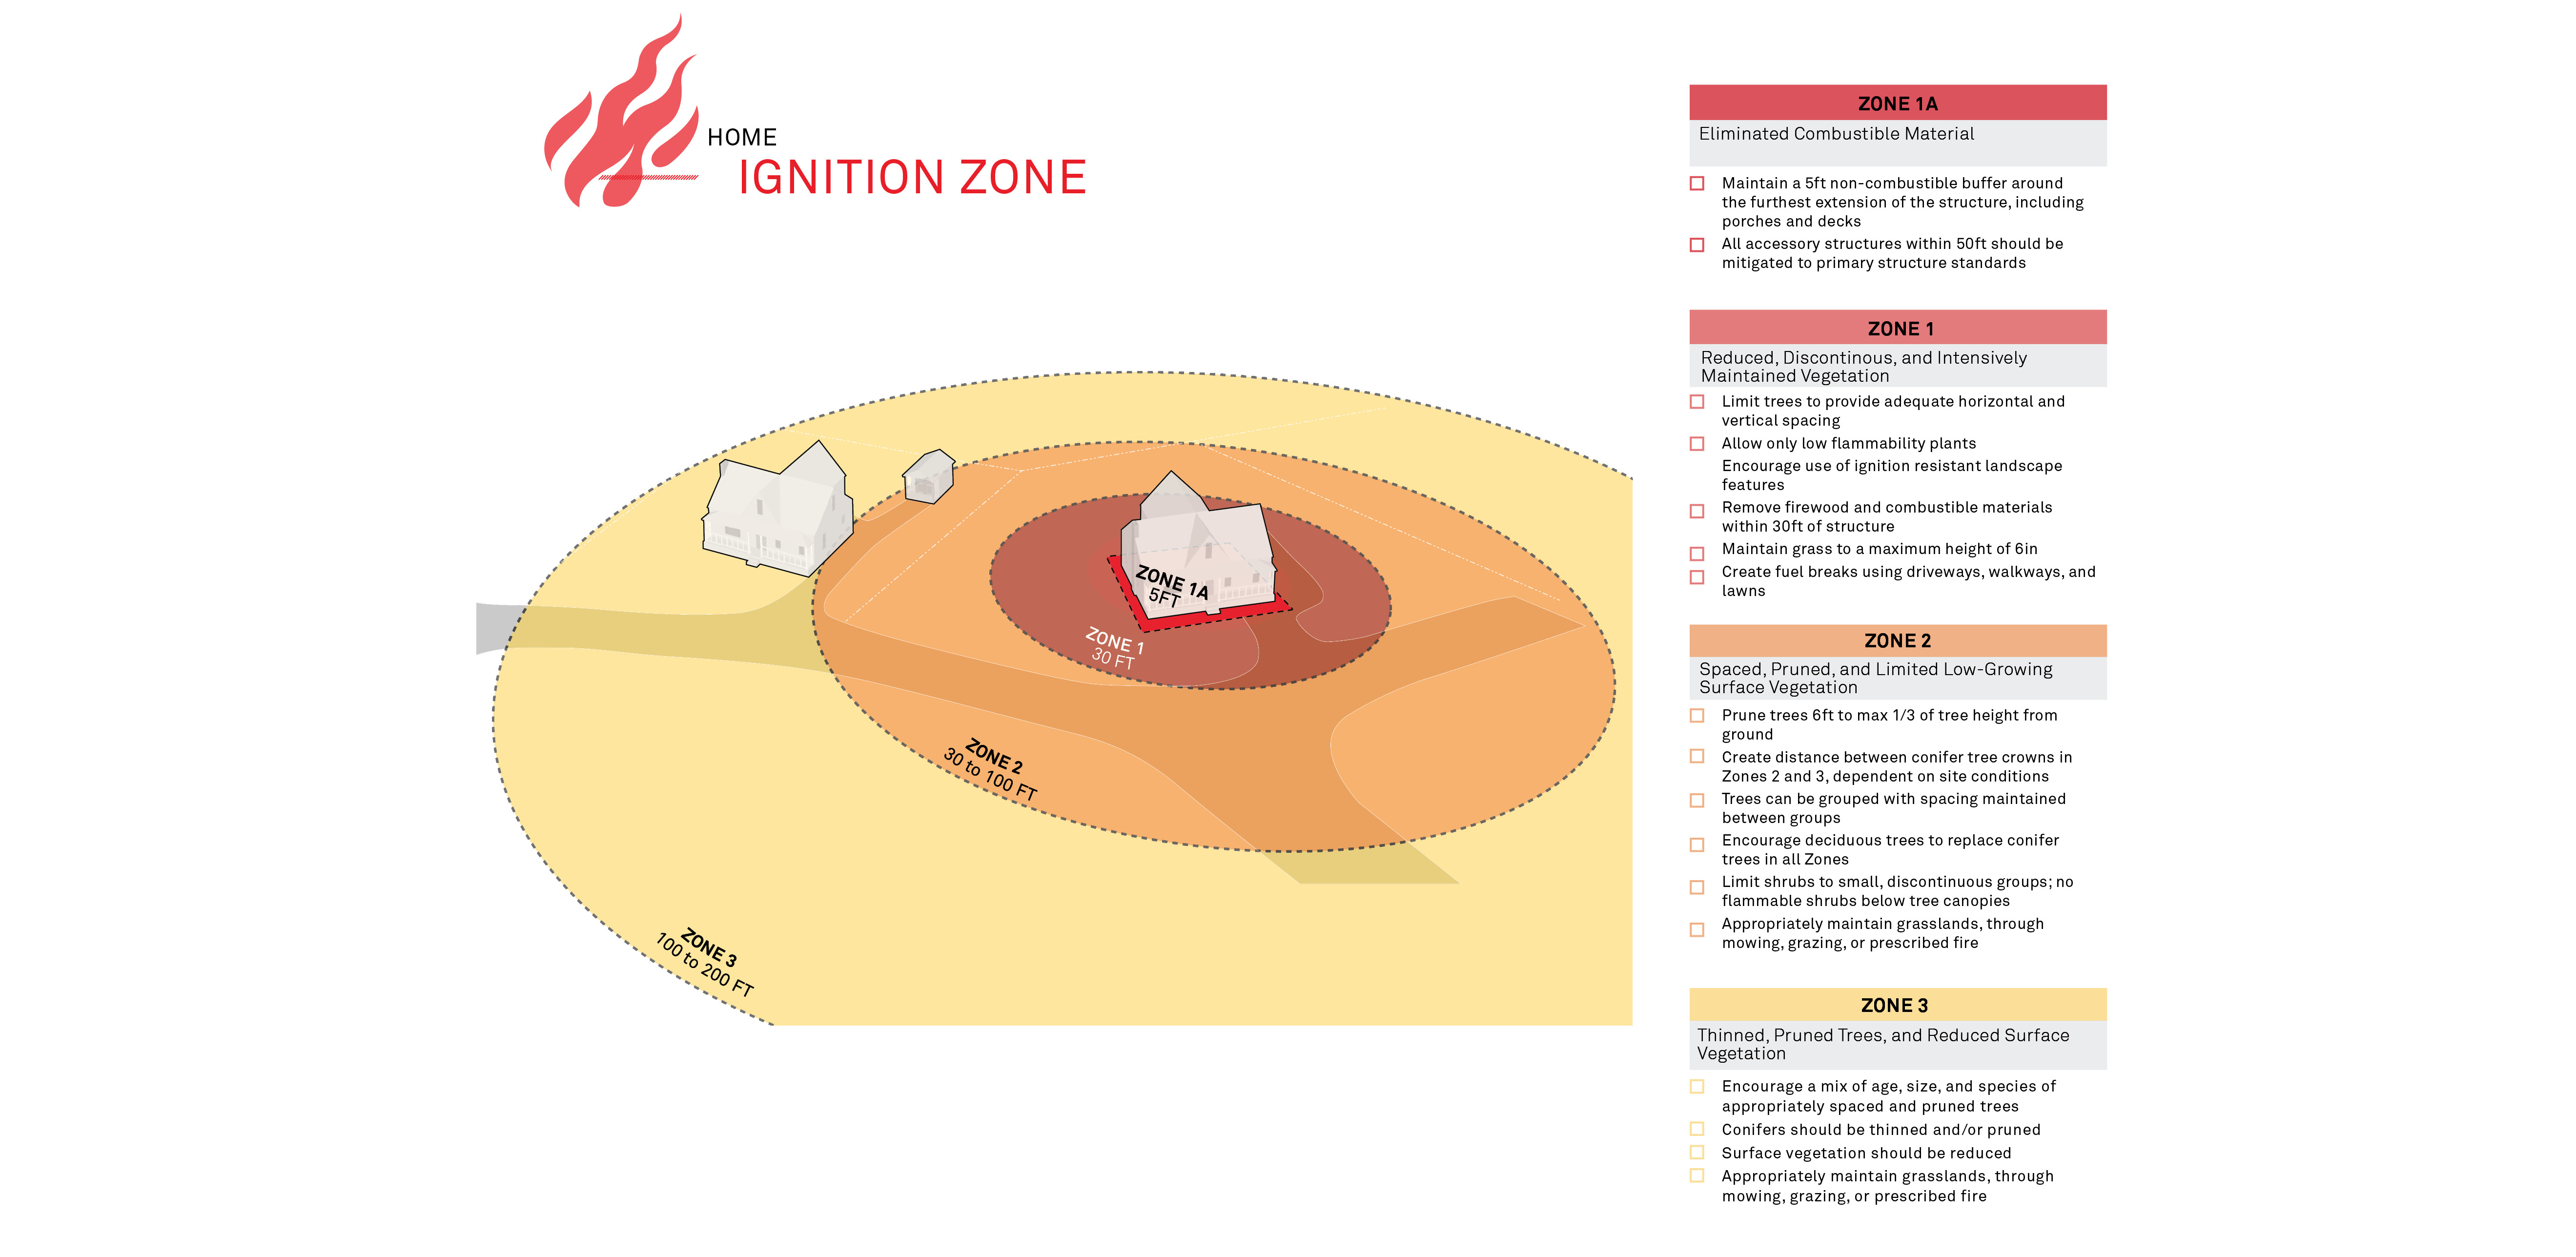 Home Ignition Zone